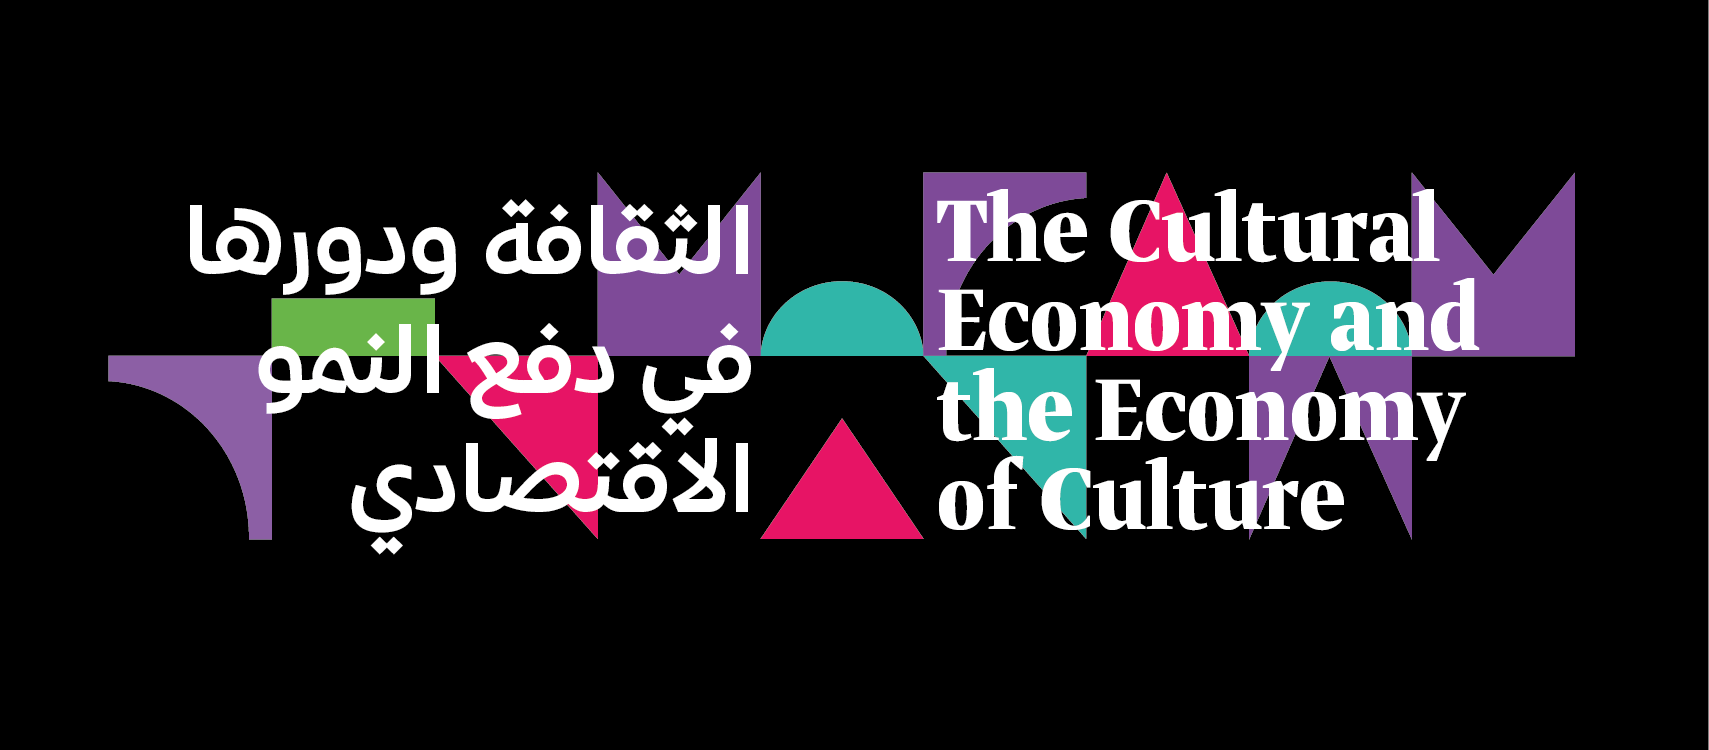 The Culture Economy and the Economy of Culture - Coming Soon in UAE